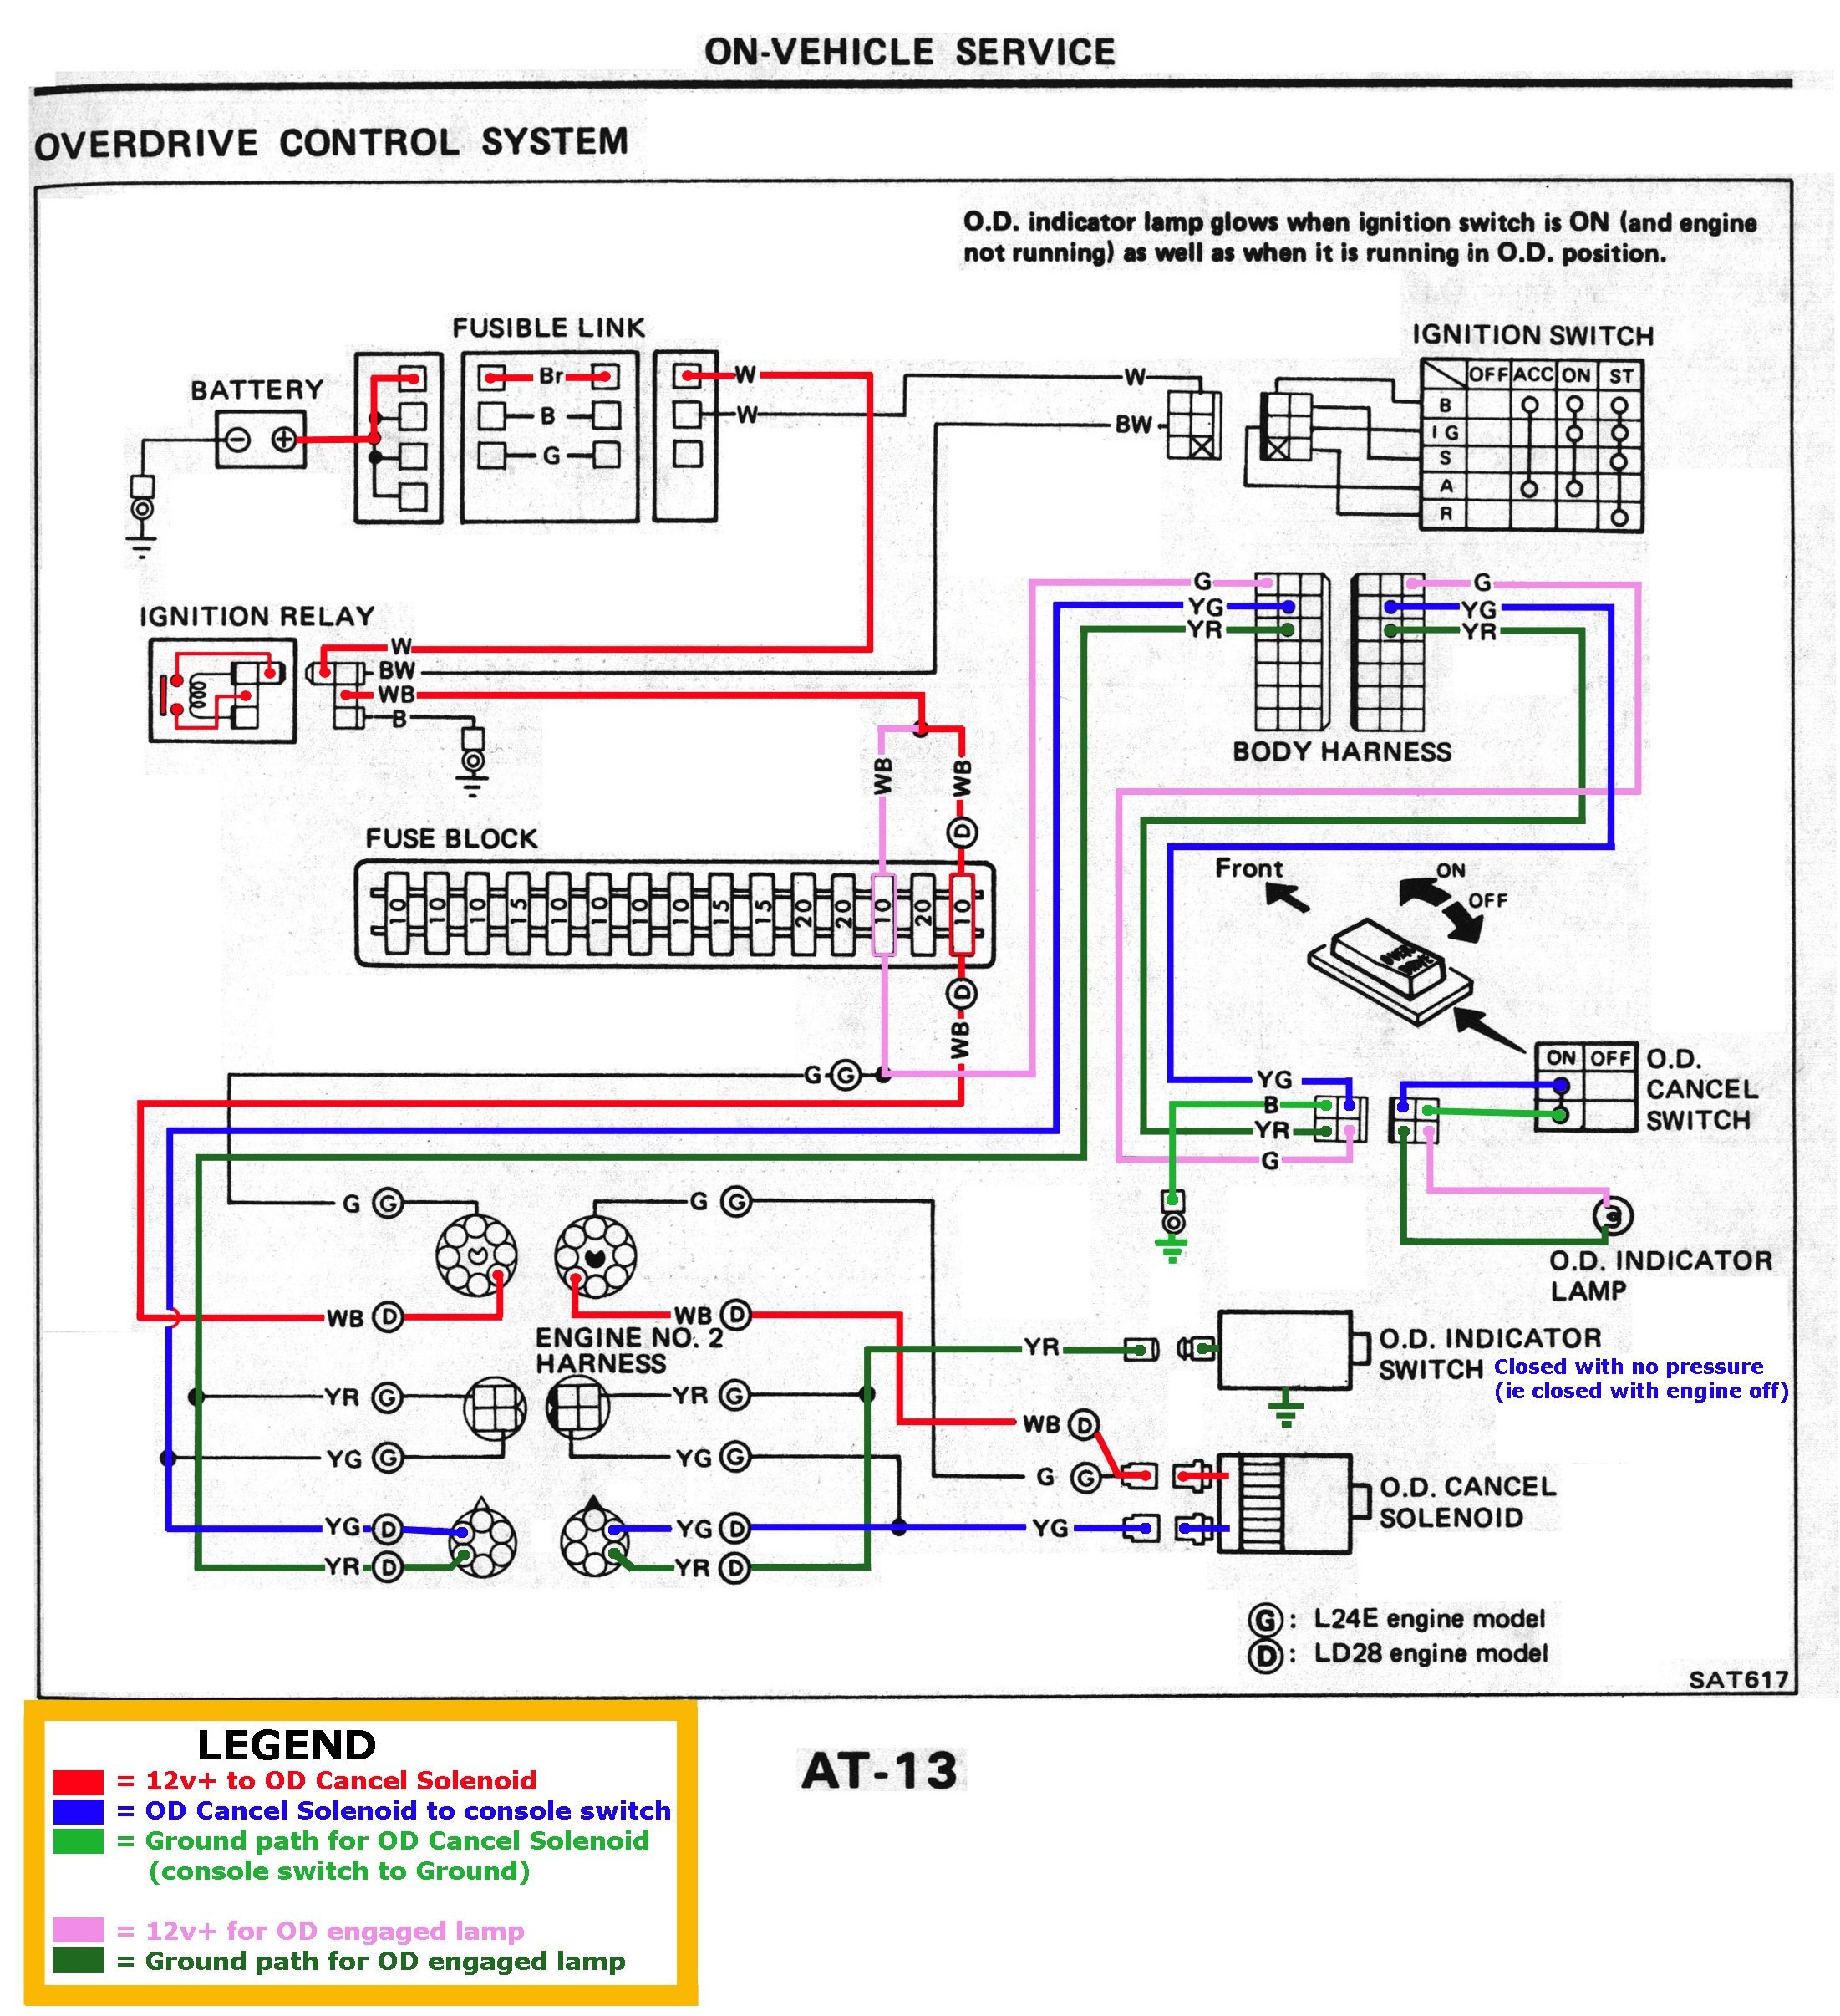 Maxxima Light Wiring Diagram Best Nissan sel forums • View topic Od Light